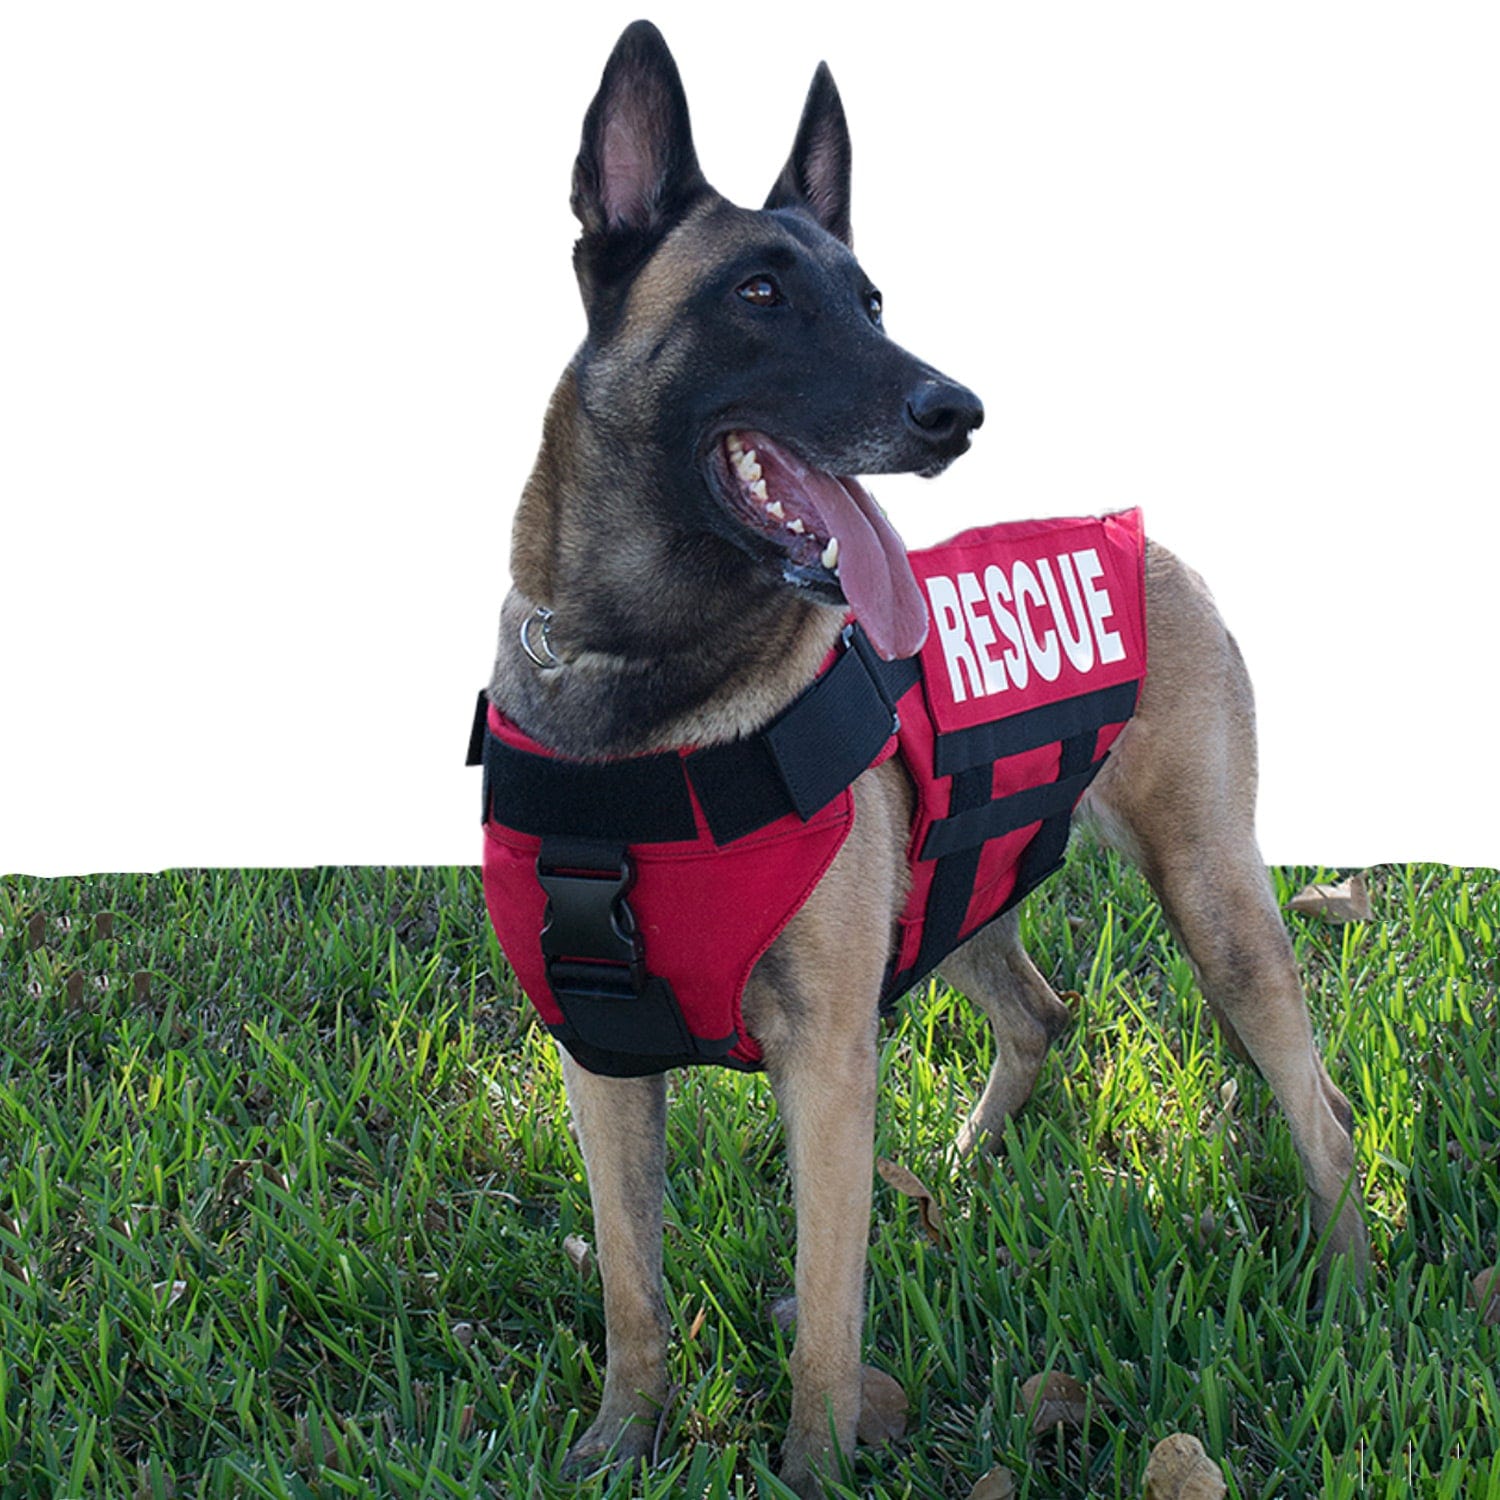 Dog Harnesses & Vests - Shop by Size, Brand, & More